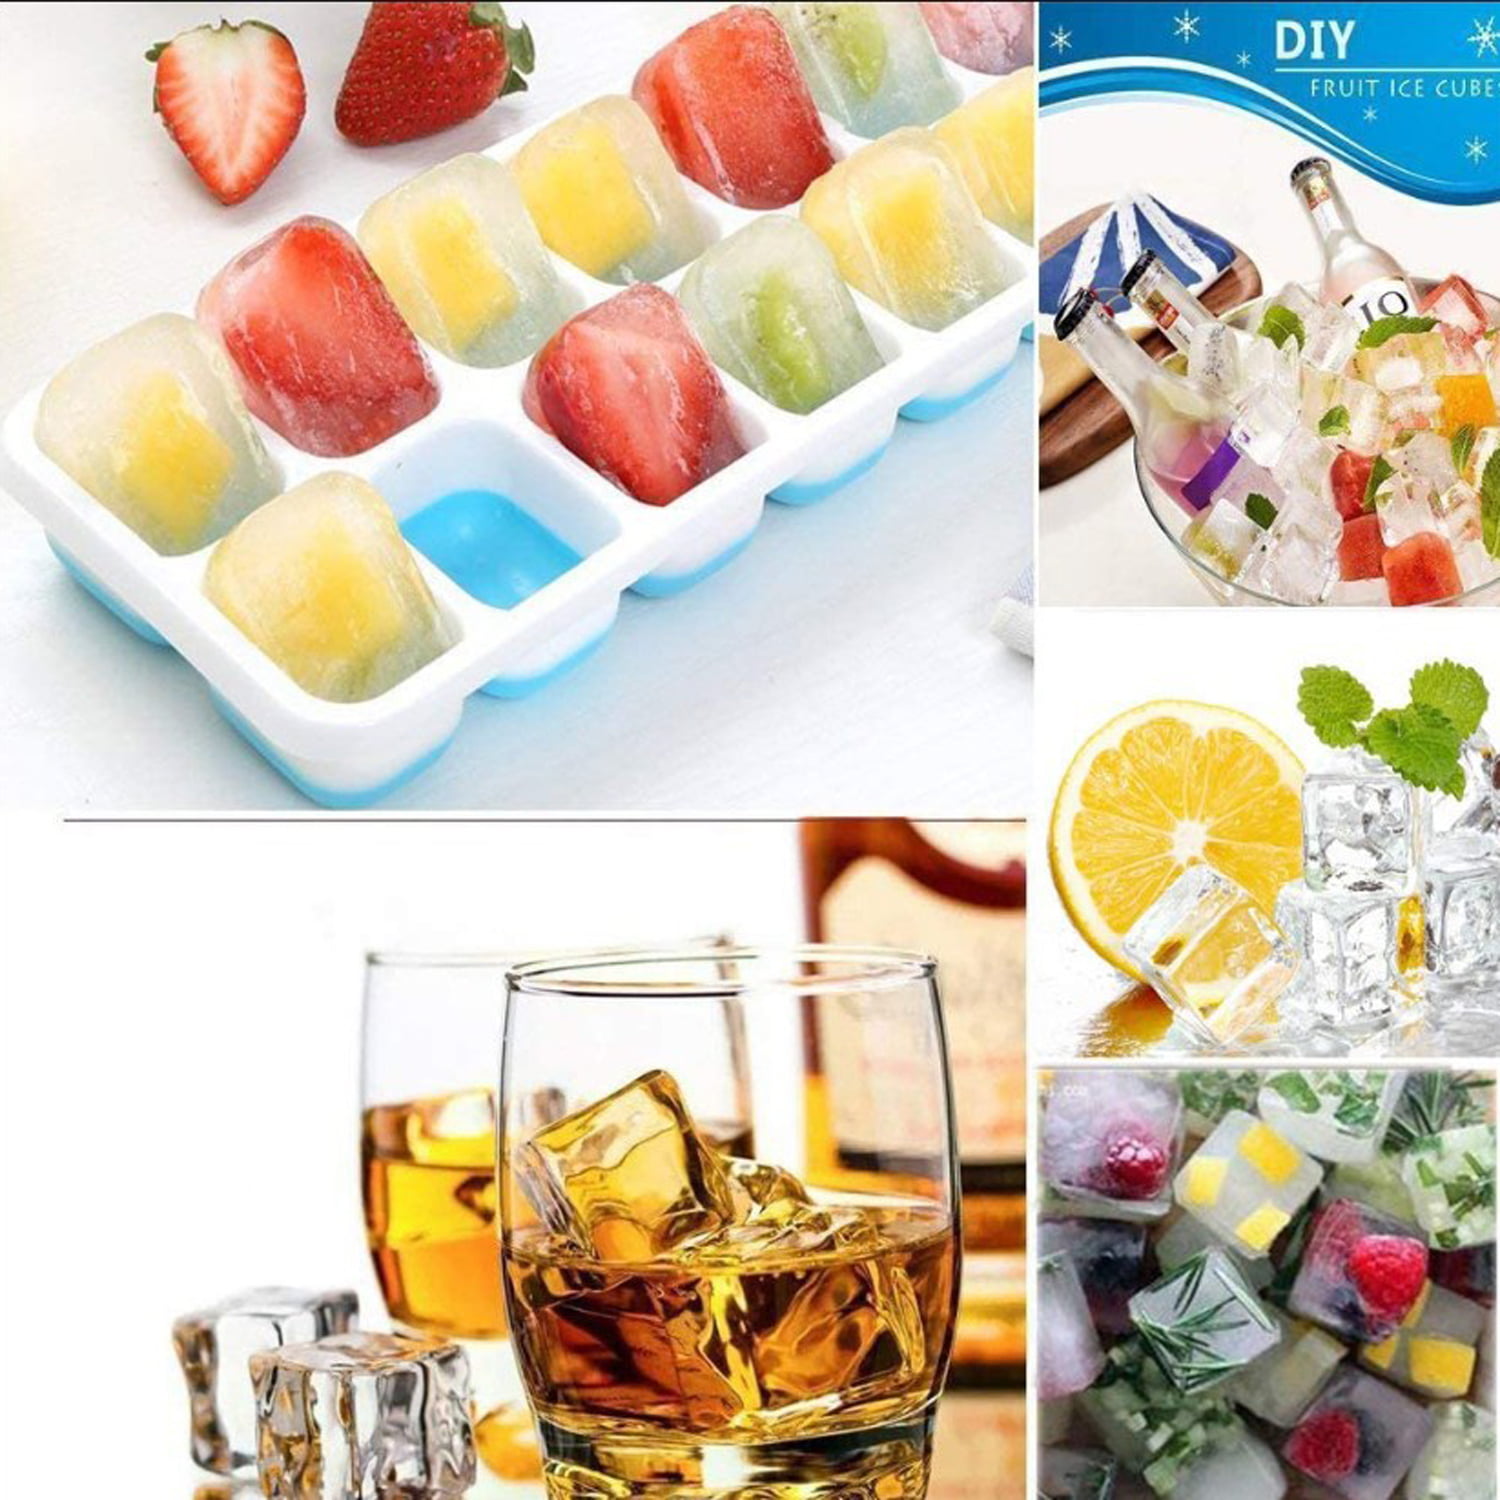 Humbee, Soft Silicone Ice cube Tray with Lid, Flexible and Stackable Ice  Tray, 1-Inch Cubes (36 Cubes, Blue)